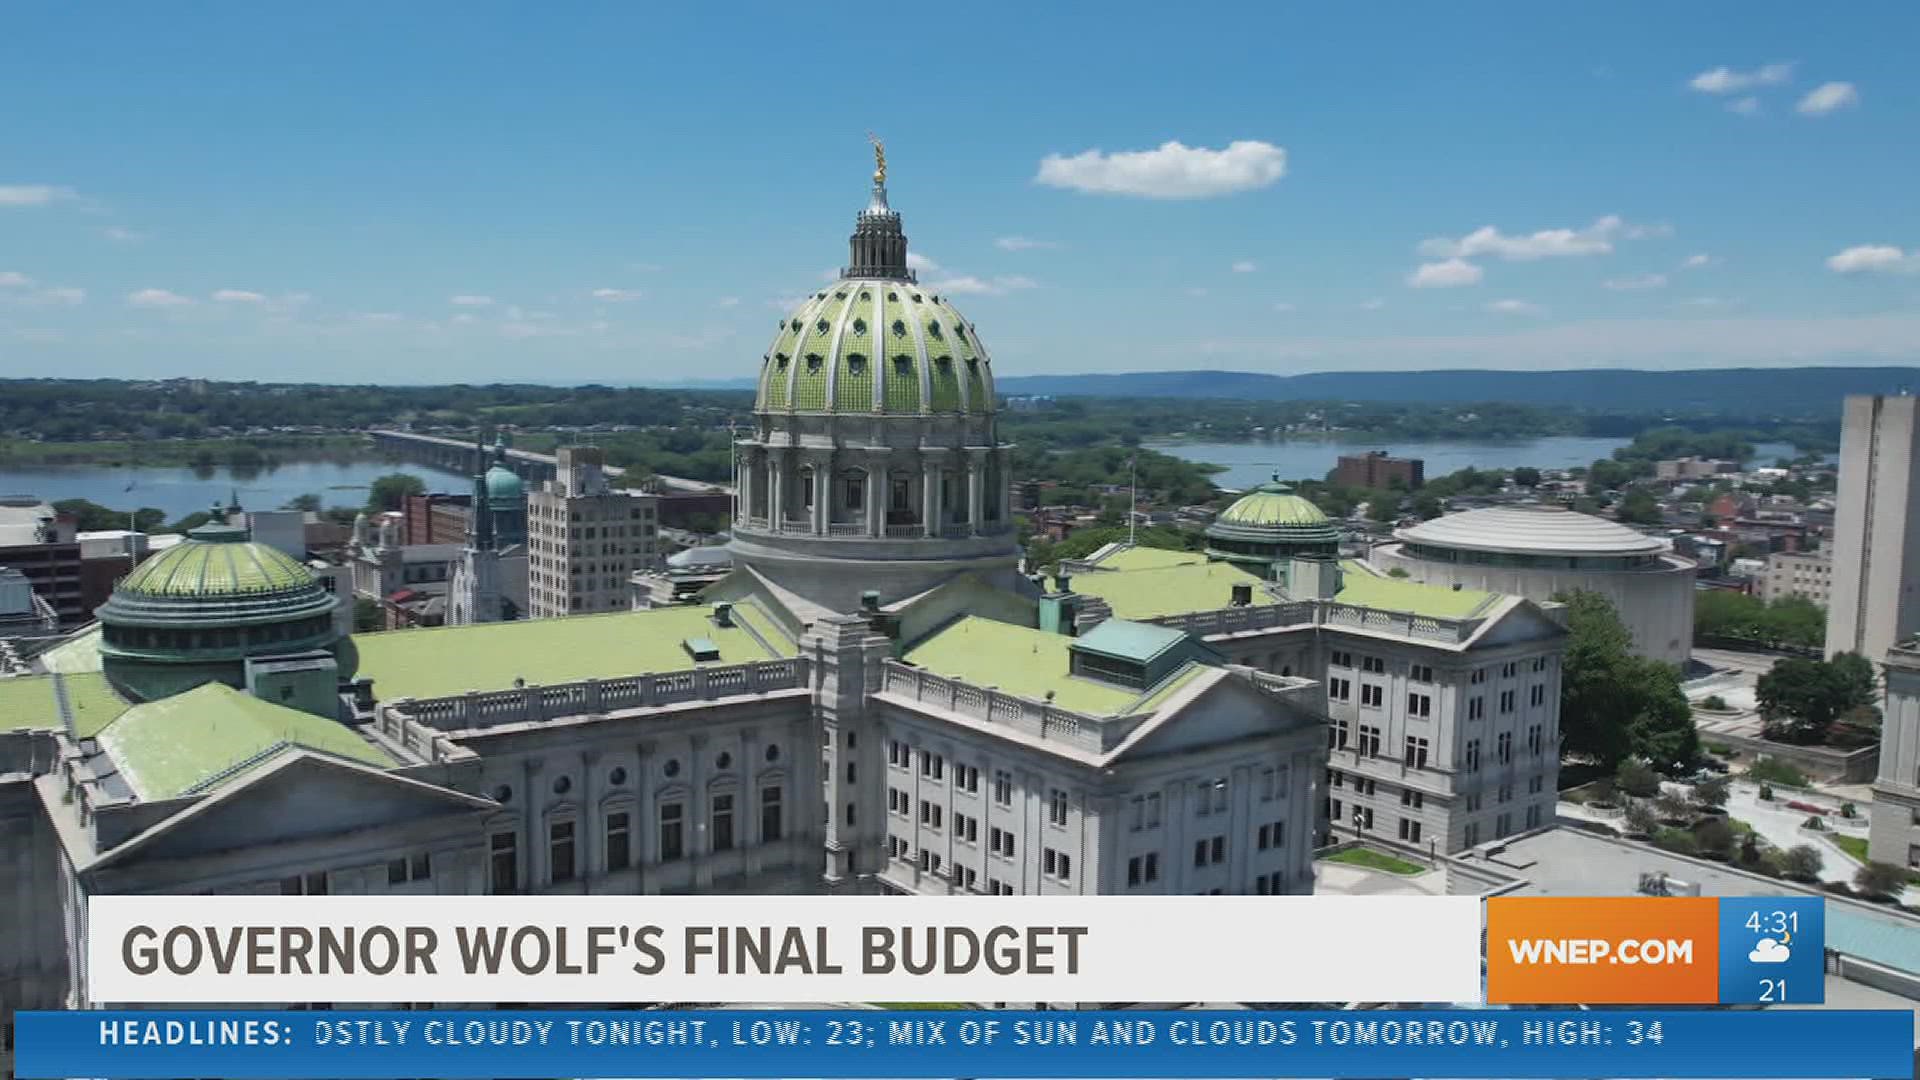 The mystery is in its final hours. Governor Wolf is set to announce the details of the 2022-23 budget Tuesday, February 8.